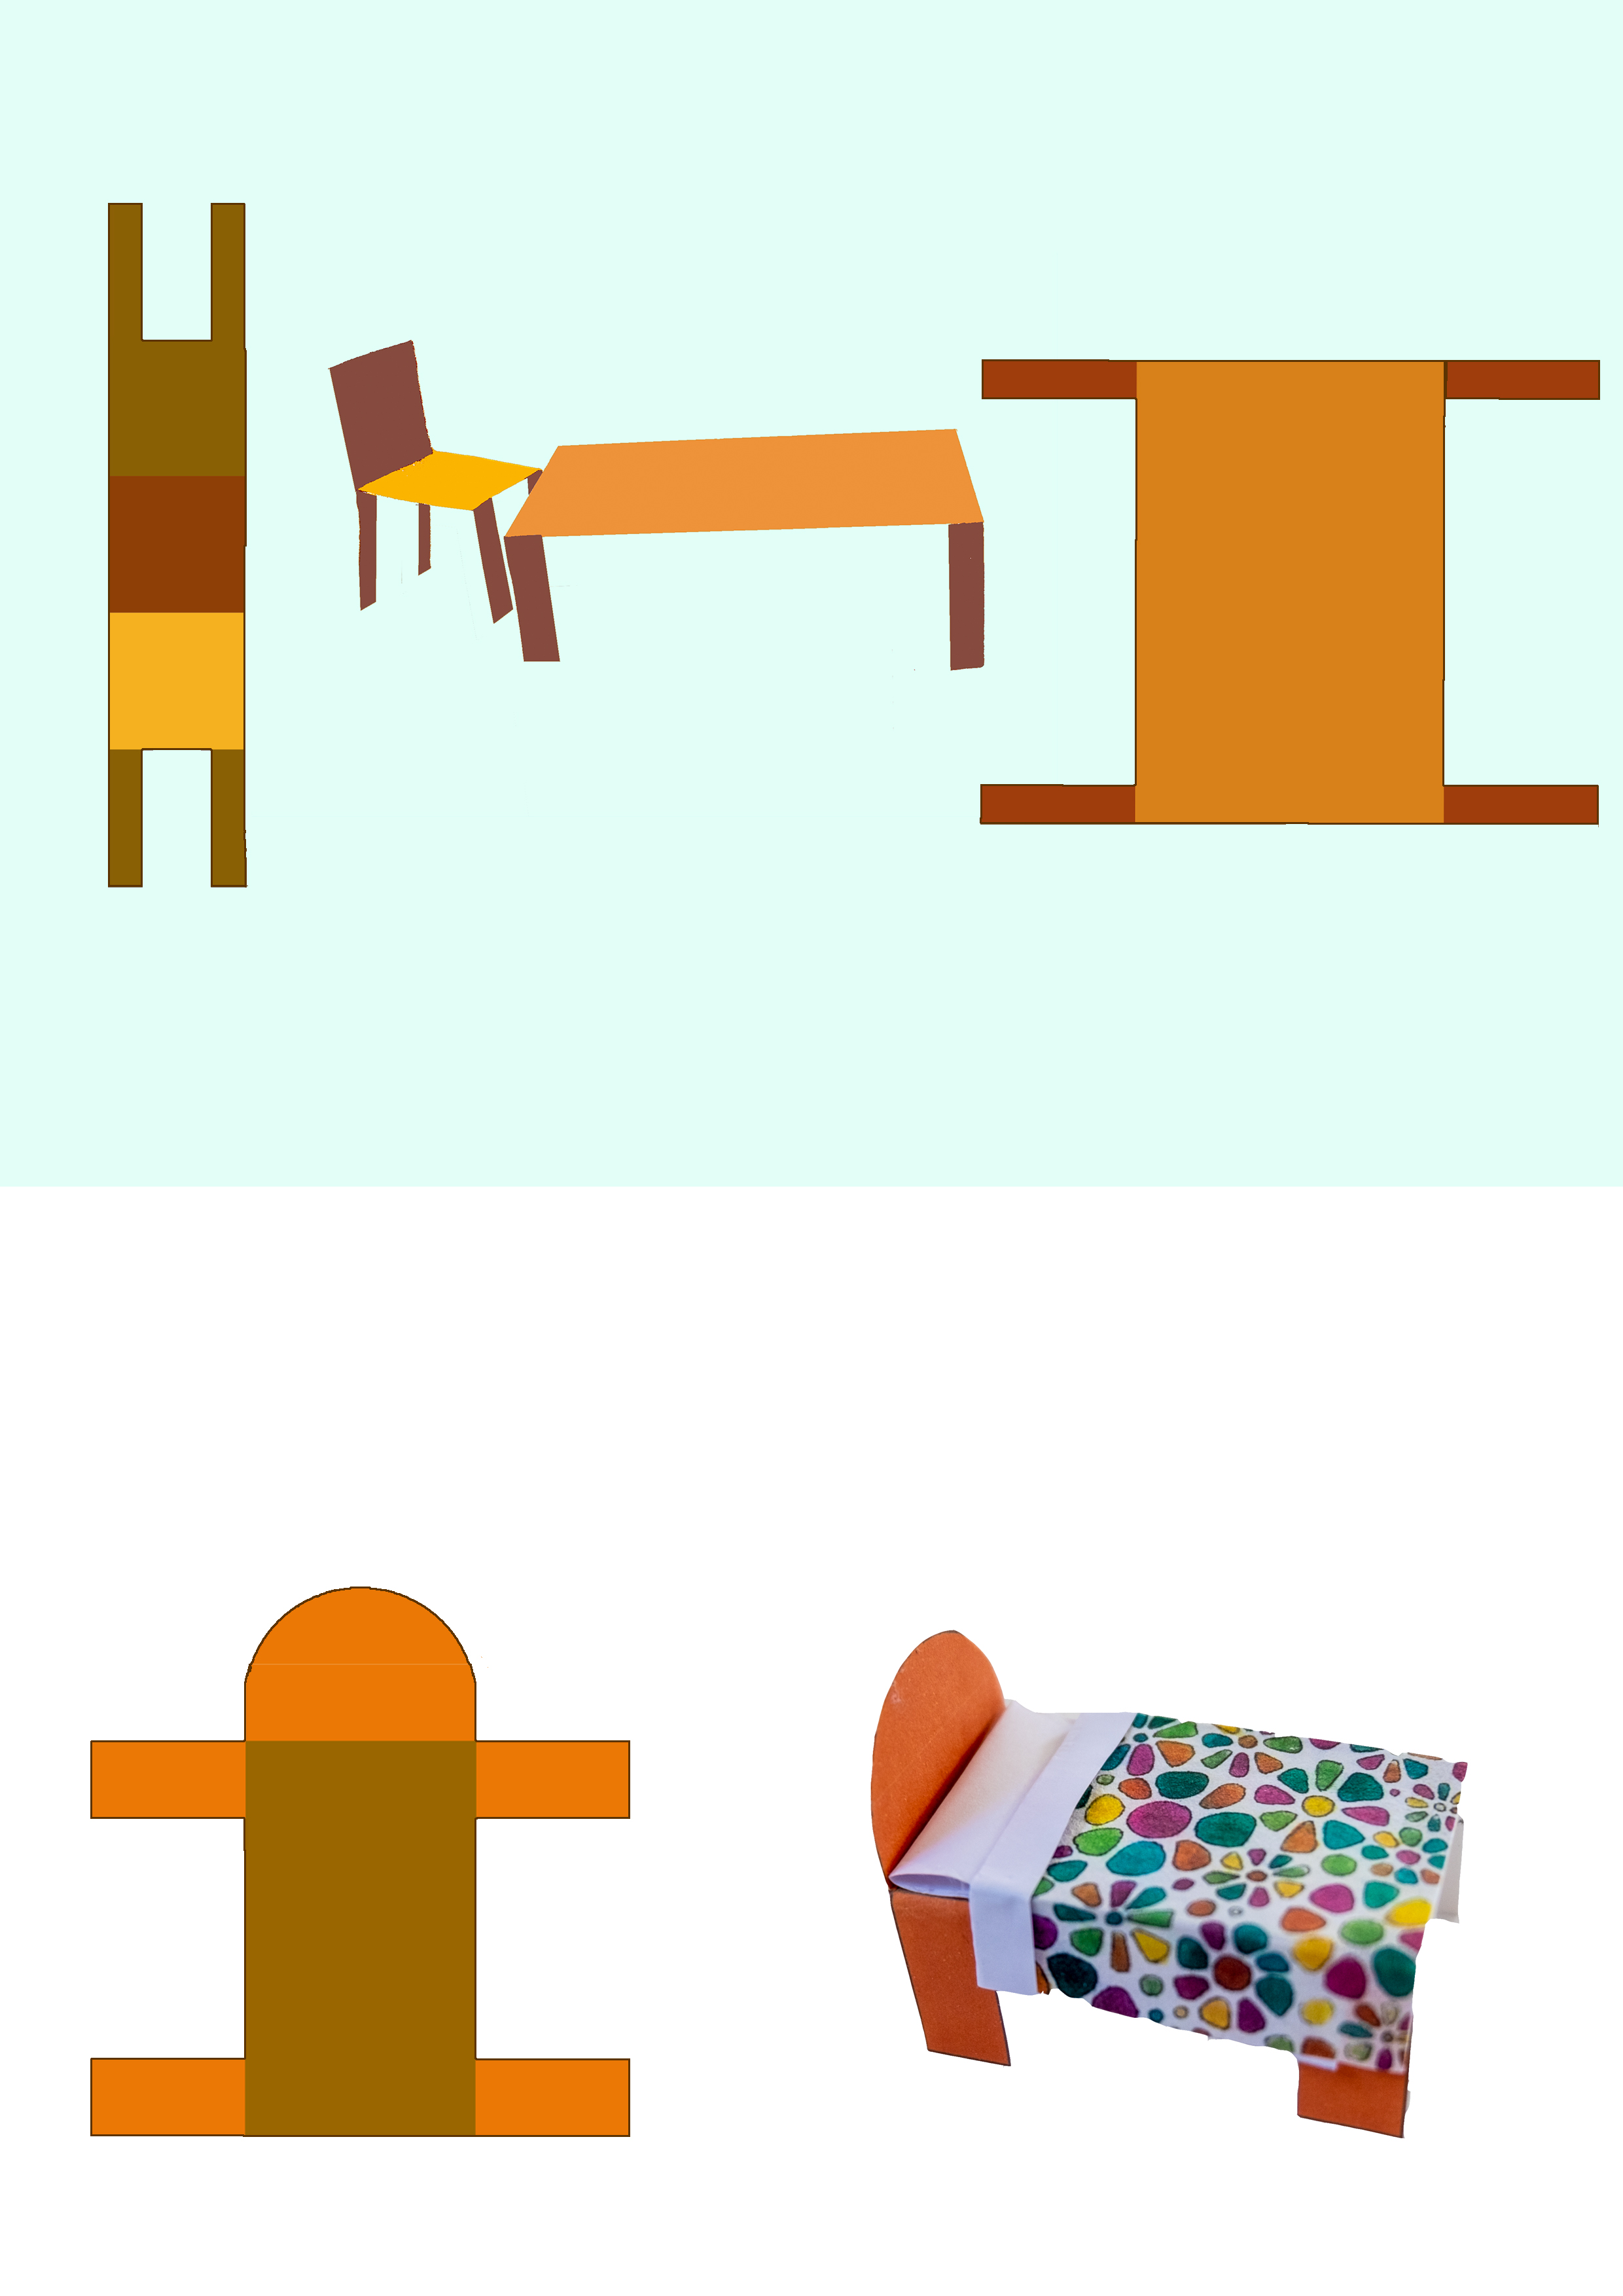 Furniture examples, use these shapes as templates to make a table, chair or bed